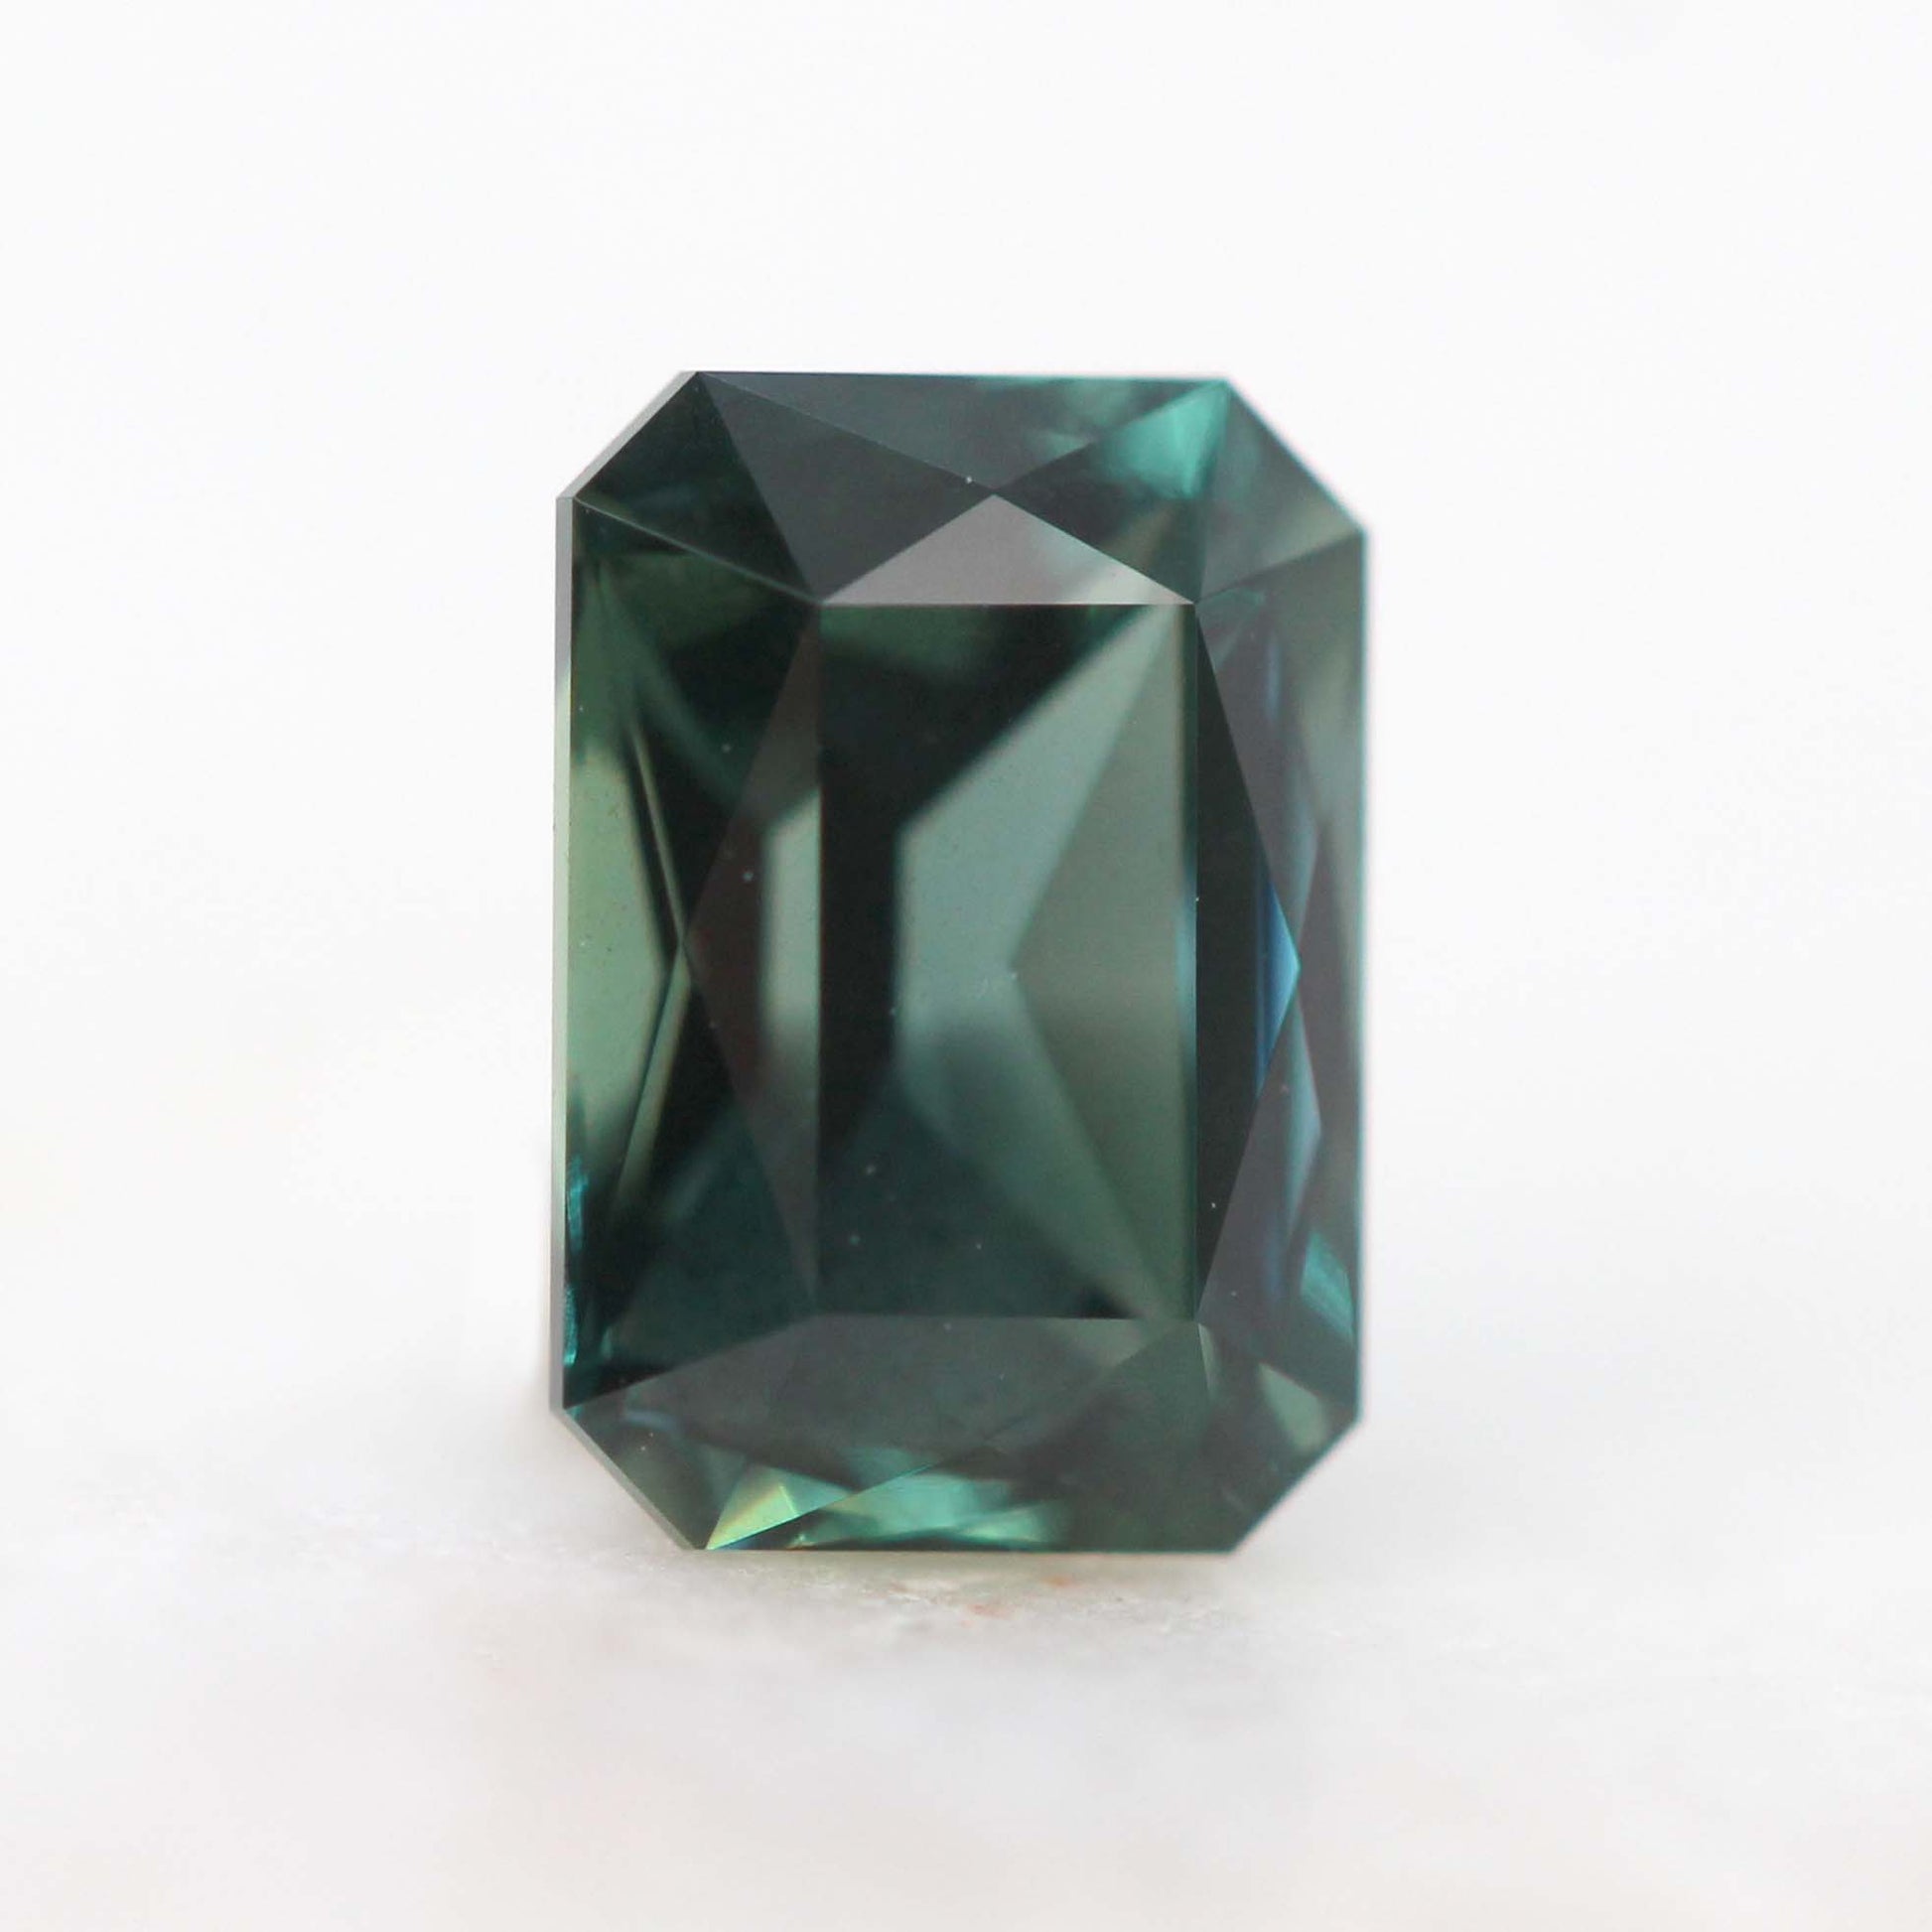 1.10 Carat Radiant Cut Green Sapphire for Custom Work - Inventory Code RGS110 - Midwinter Co. Alternative Bridal Rings and Modern Fine Jewelry